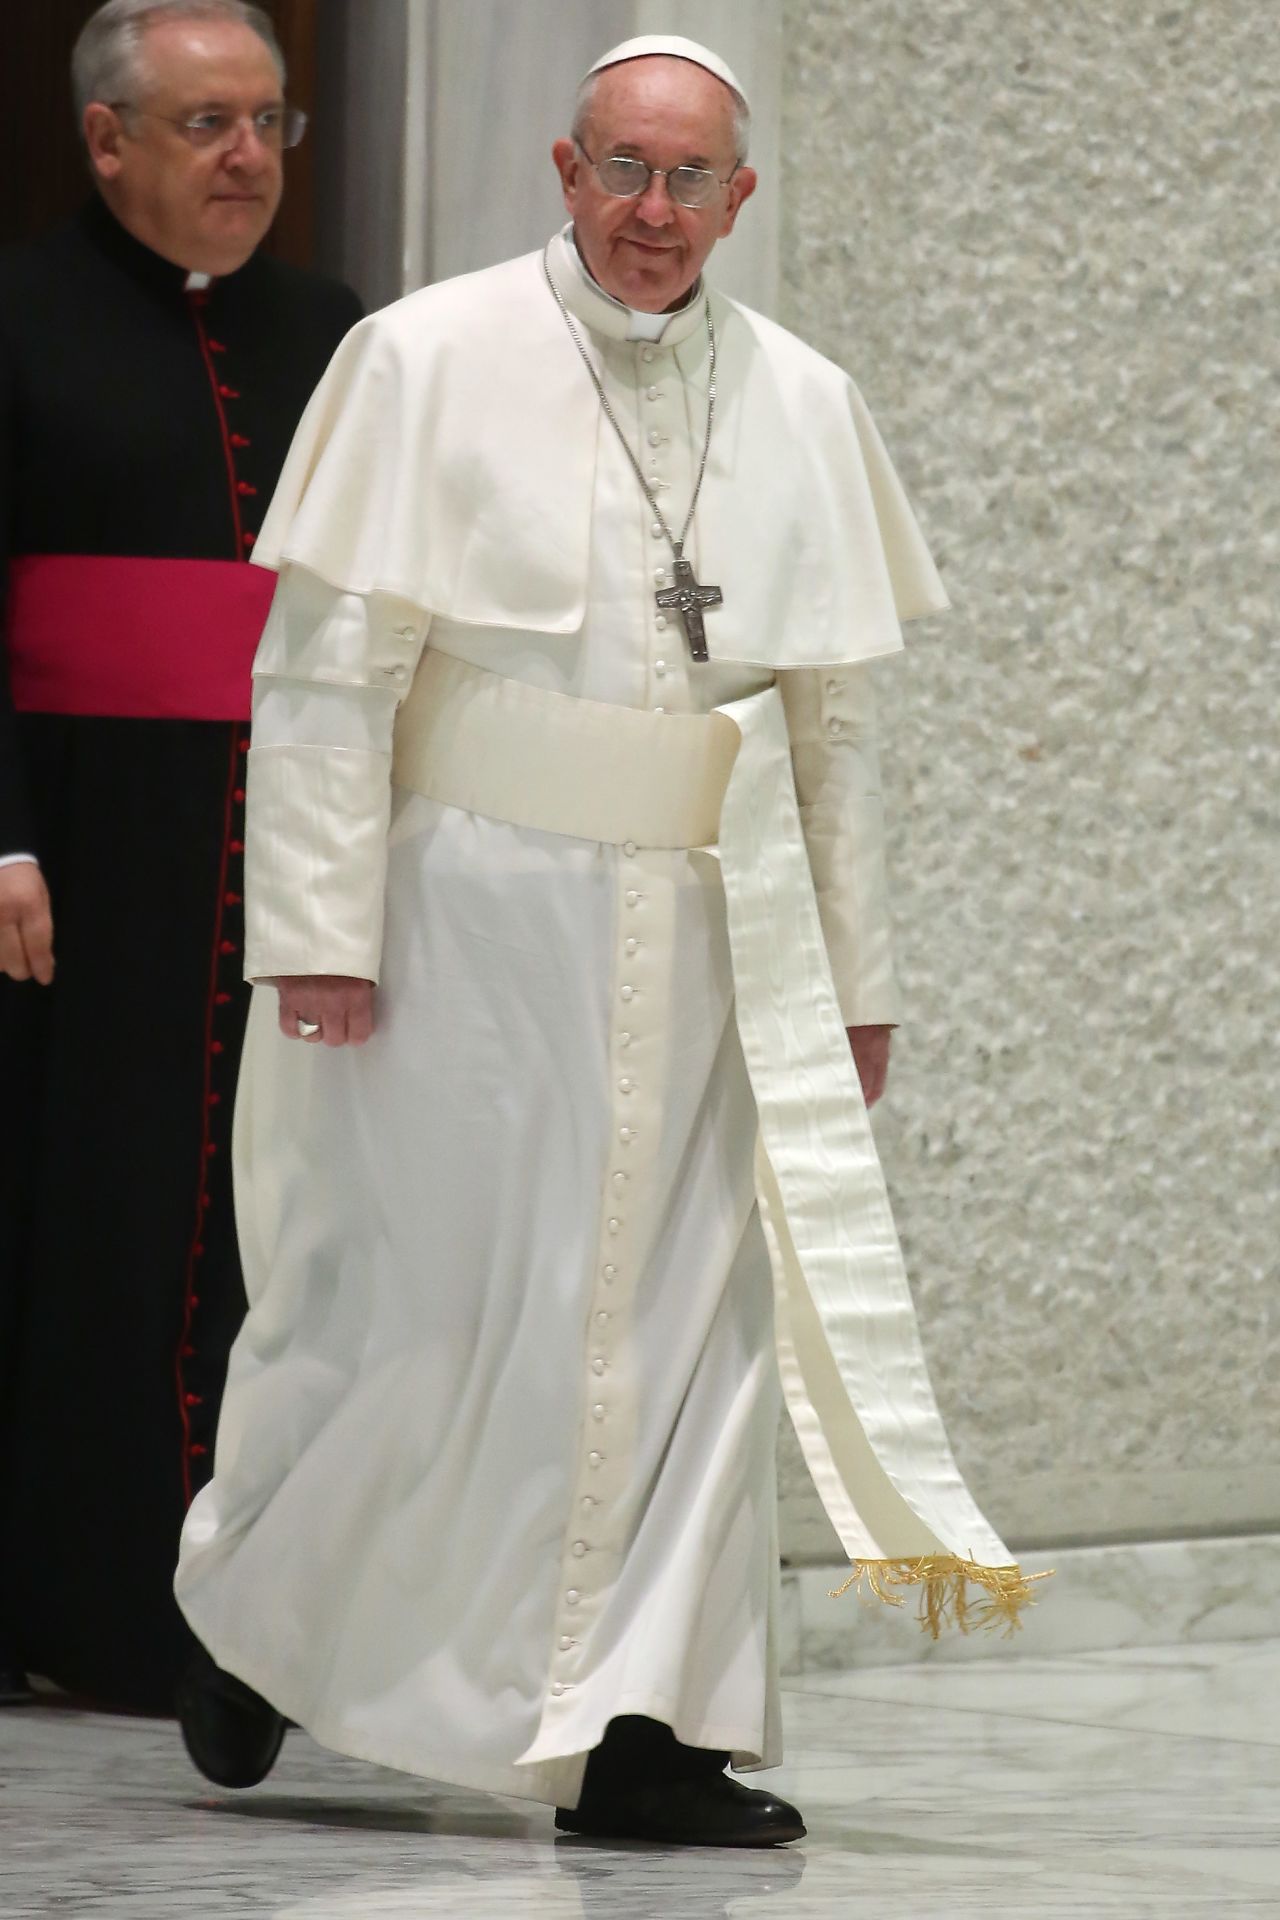 Here, Pope Francis wears a cassock. The cassock, also called a soutane, can be worn by all clerics, Beck said, but the papal one is white. According to Beck, legend has it that Pope Pius V was used to wearing a white religious habit and he wanted to keep the tradition going. "And so ever since," Beck said, "it has remained white."